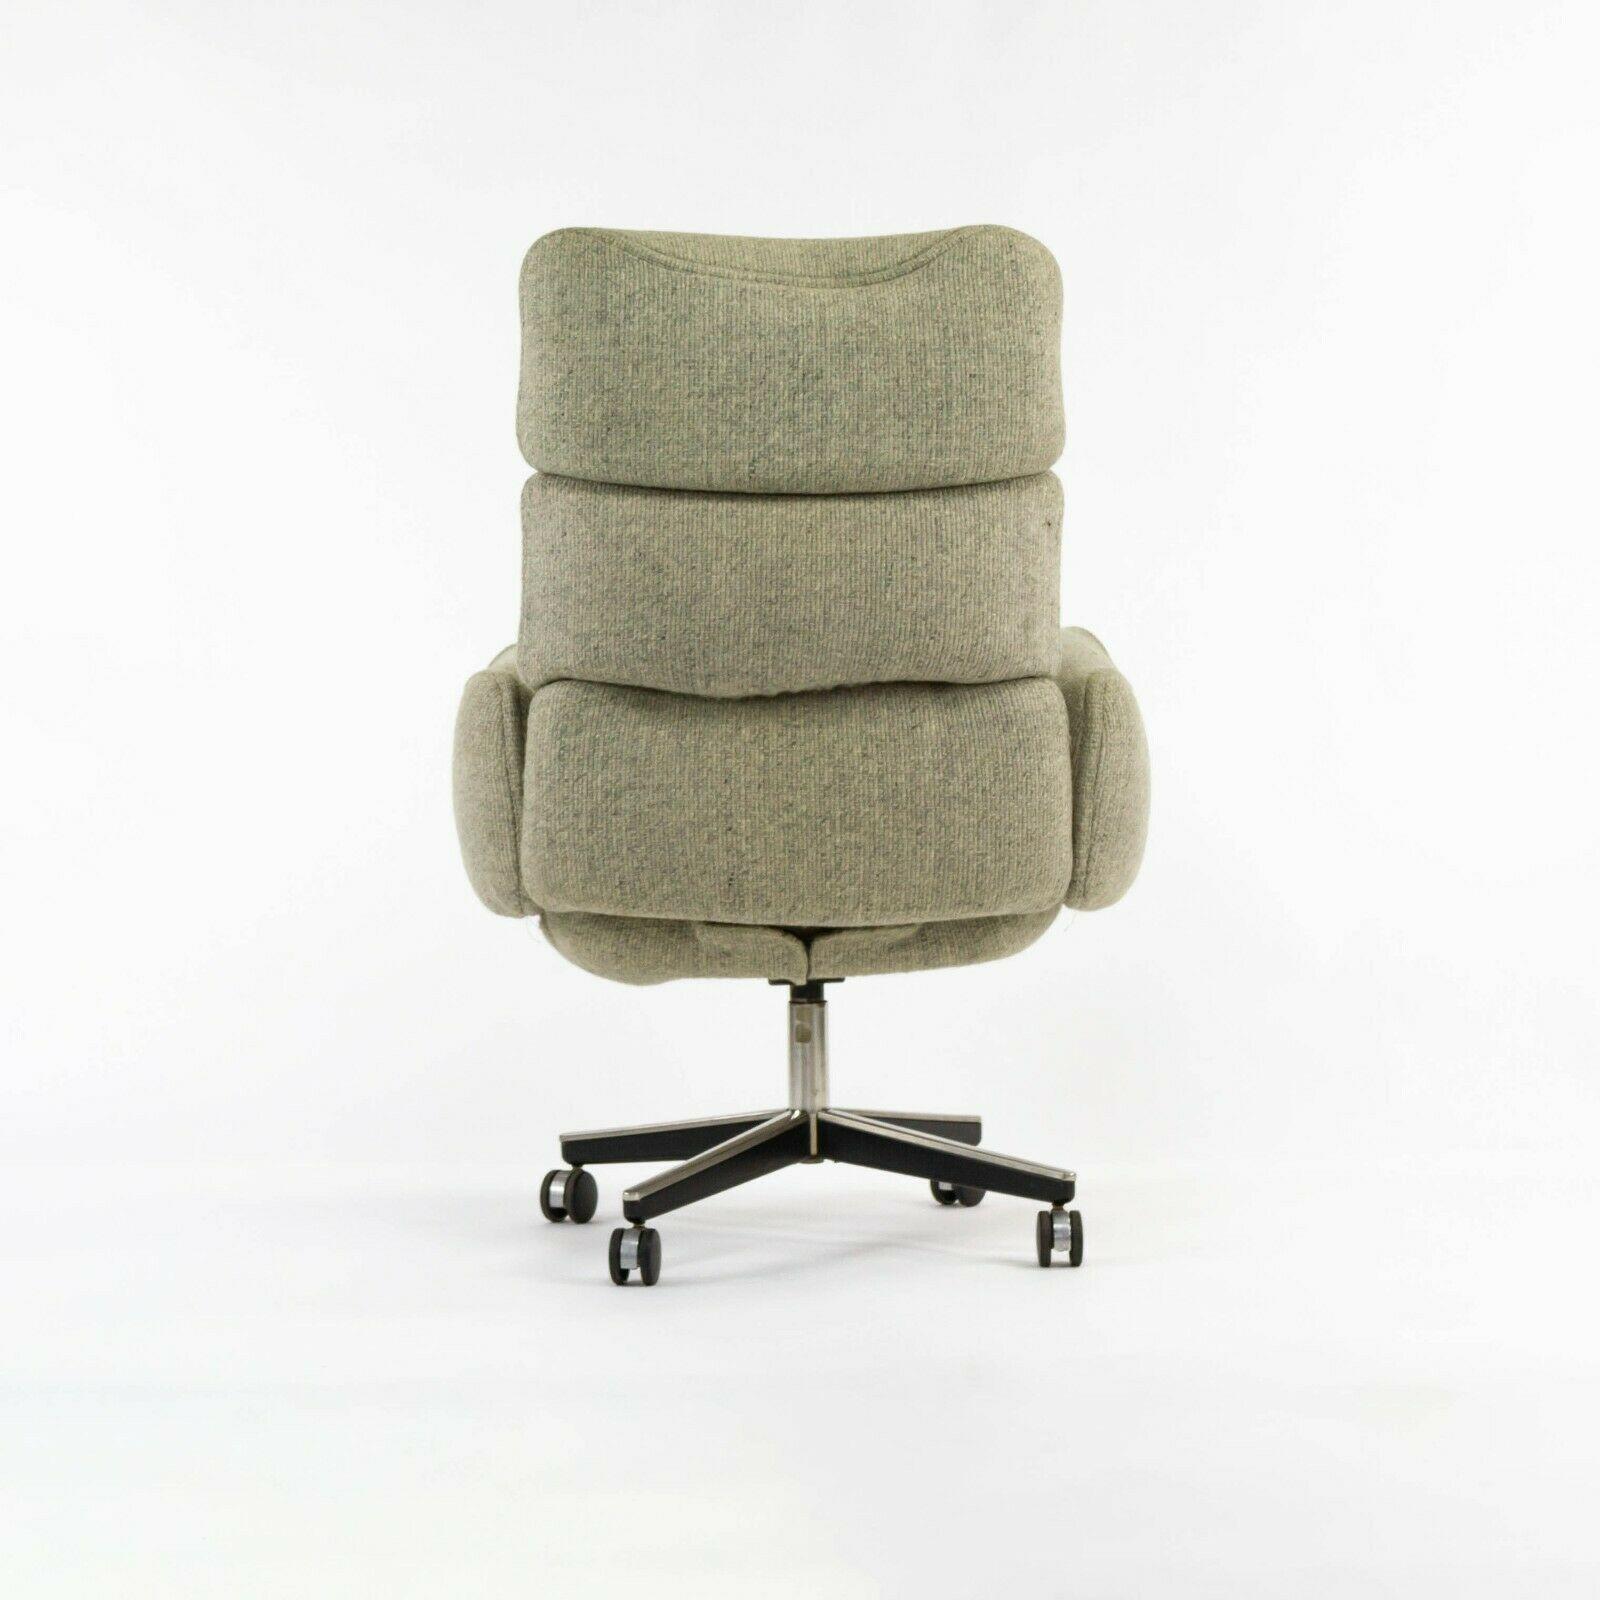 1980's Otto Zapf for Knoll High Back Office Desk Chair w/ Fabric Upholstery In Good Condition For Sale In Philadelphia, PA